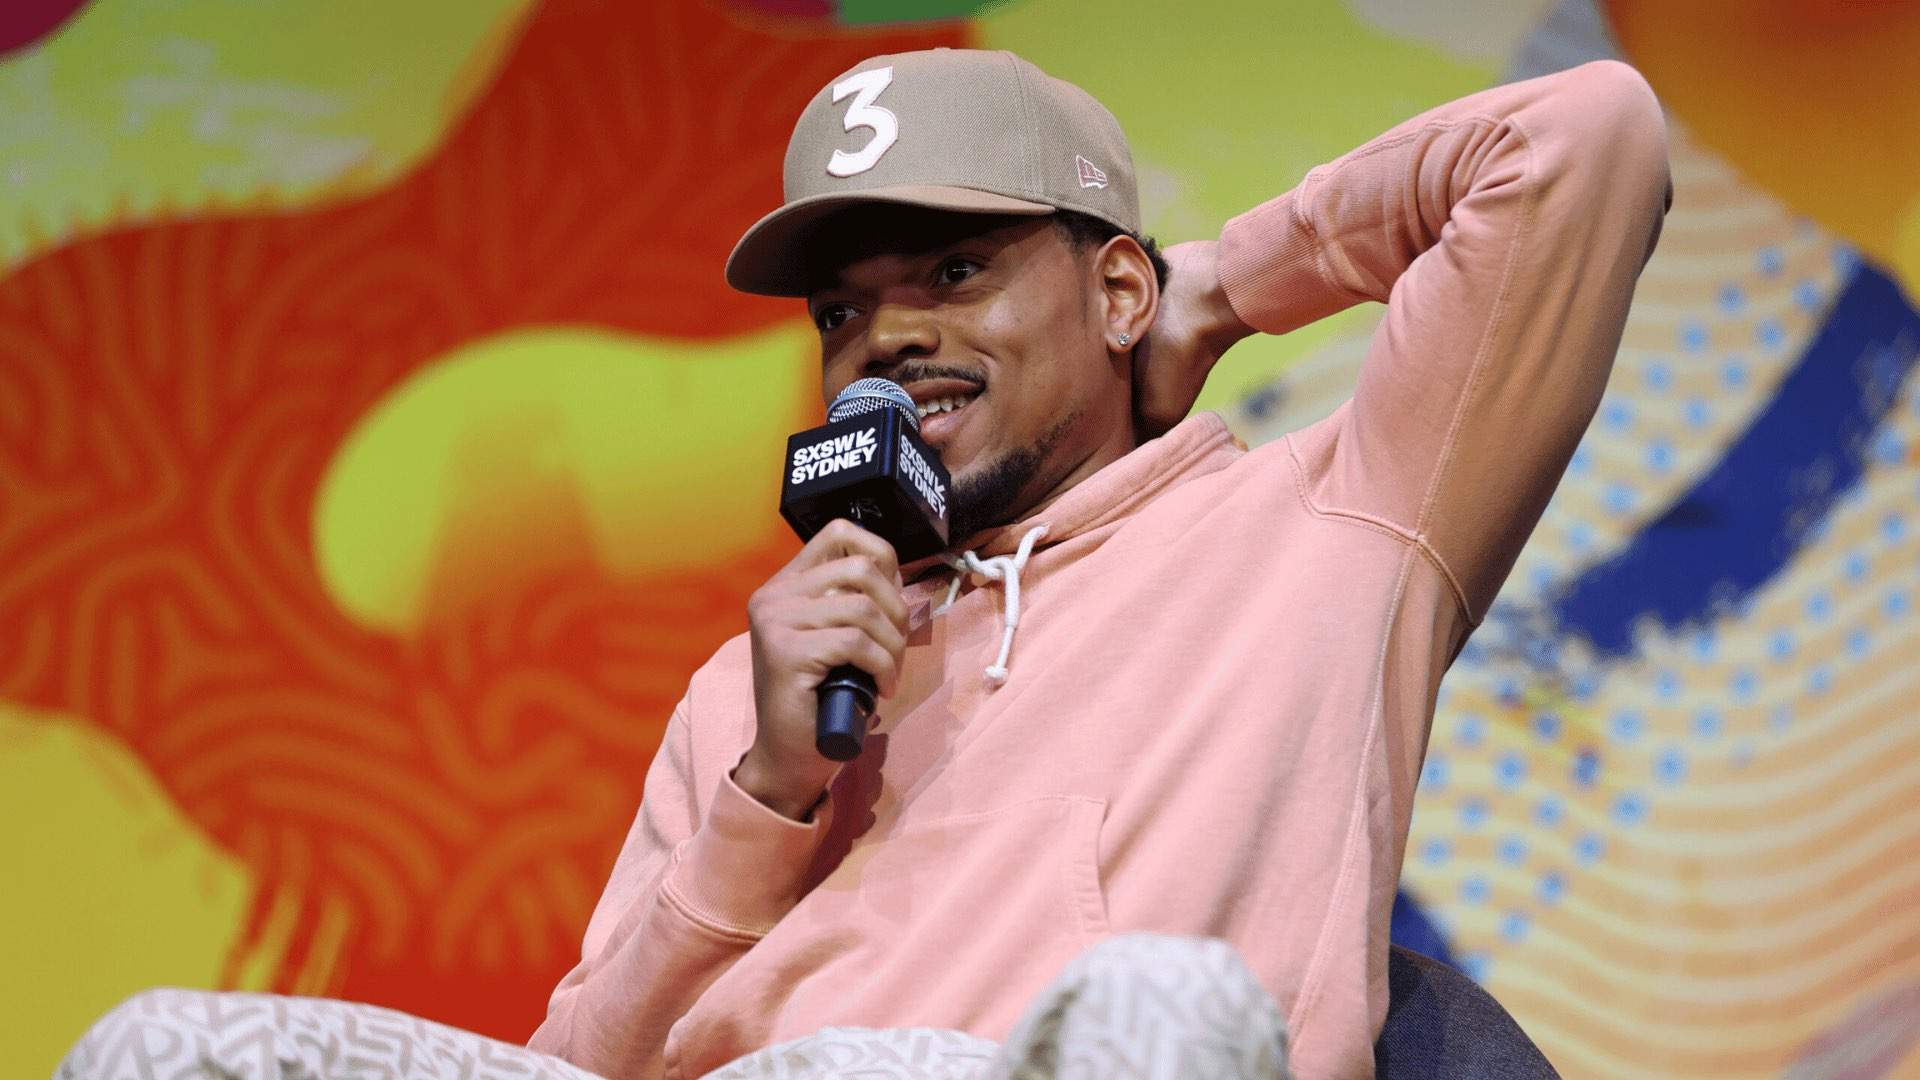 Chance the Rapper speaks during the '50th Anniversary Of Hip Hop' keynote at SXSW Sydney.